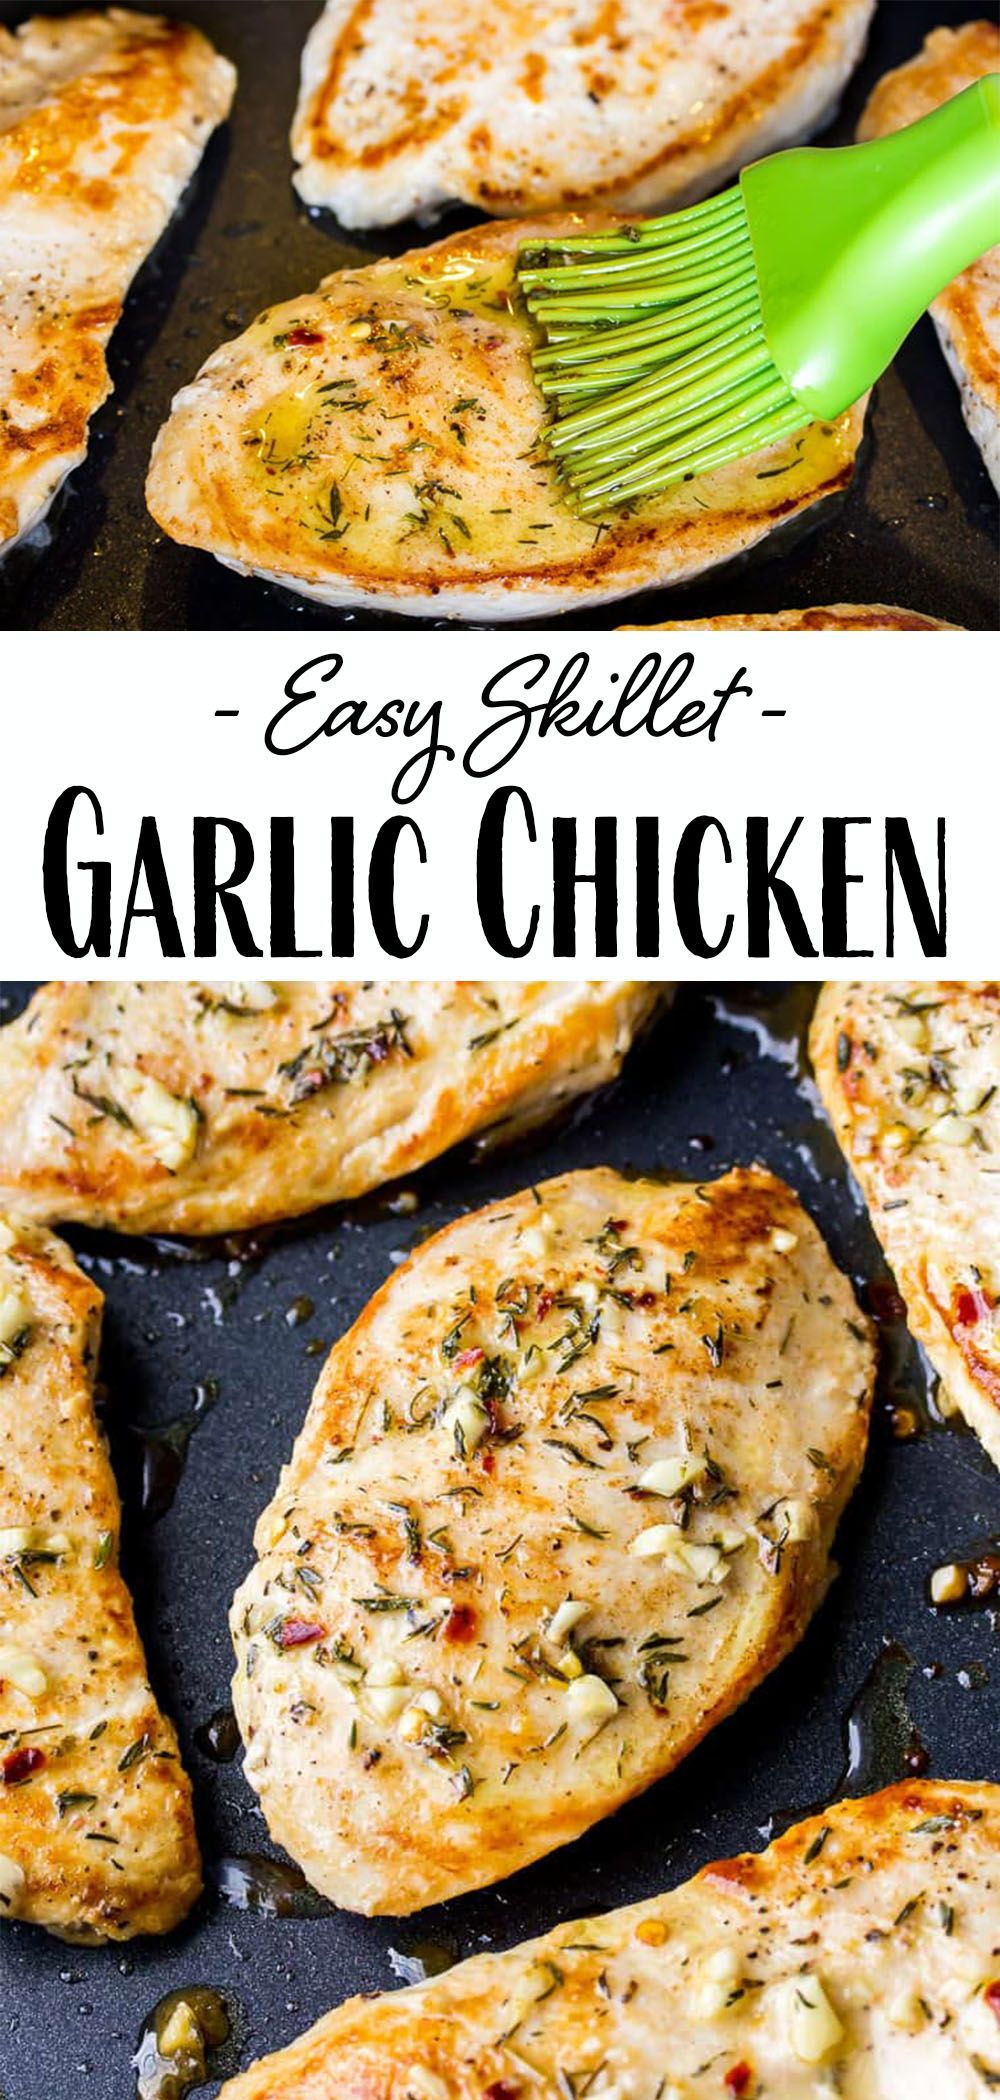 25 dinner recipes for family main dishes chicken breasts ideas